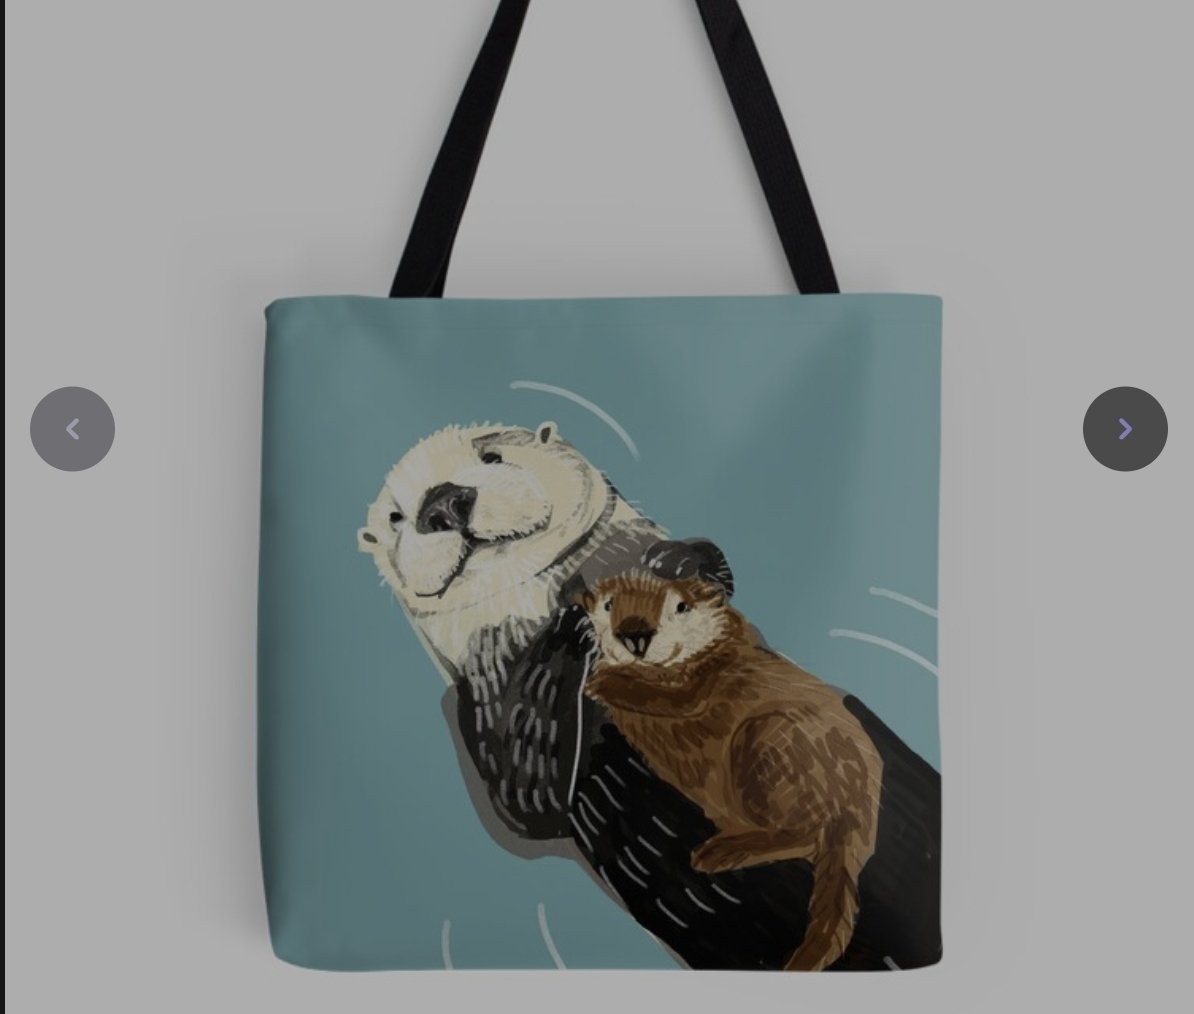 #seaotter #totebag at @redbubble by @BeletteLePink #belettelepink #redbbble #findyourthing redbubble.com/i/tote-bag/Ala…